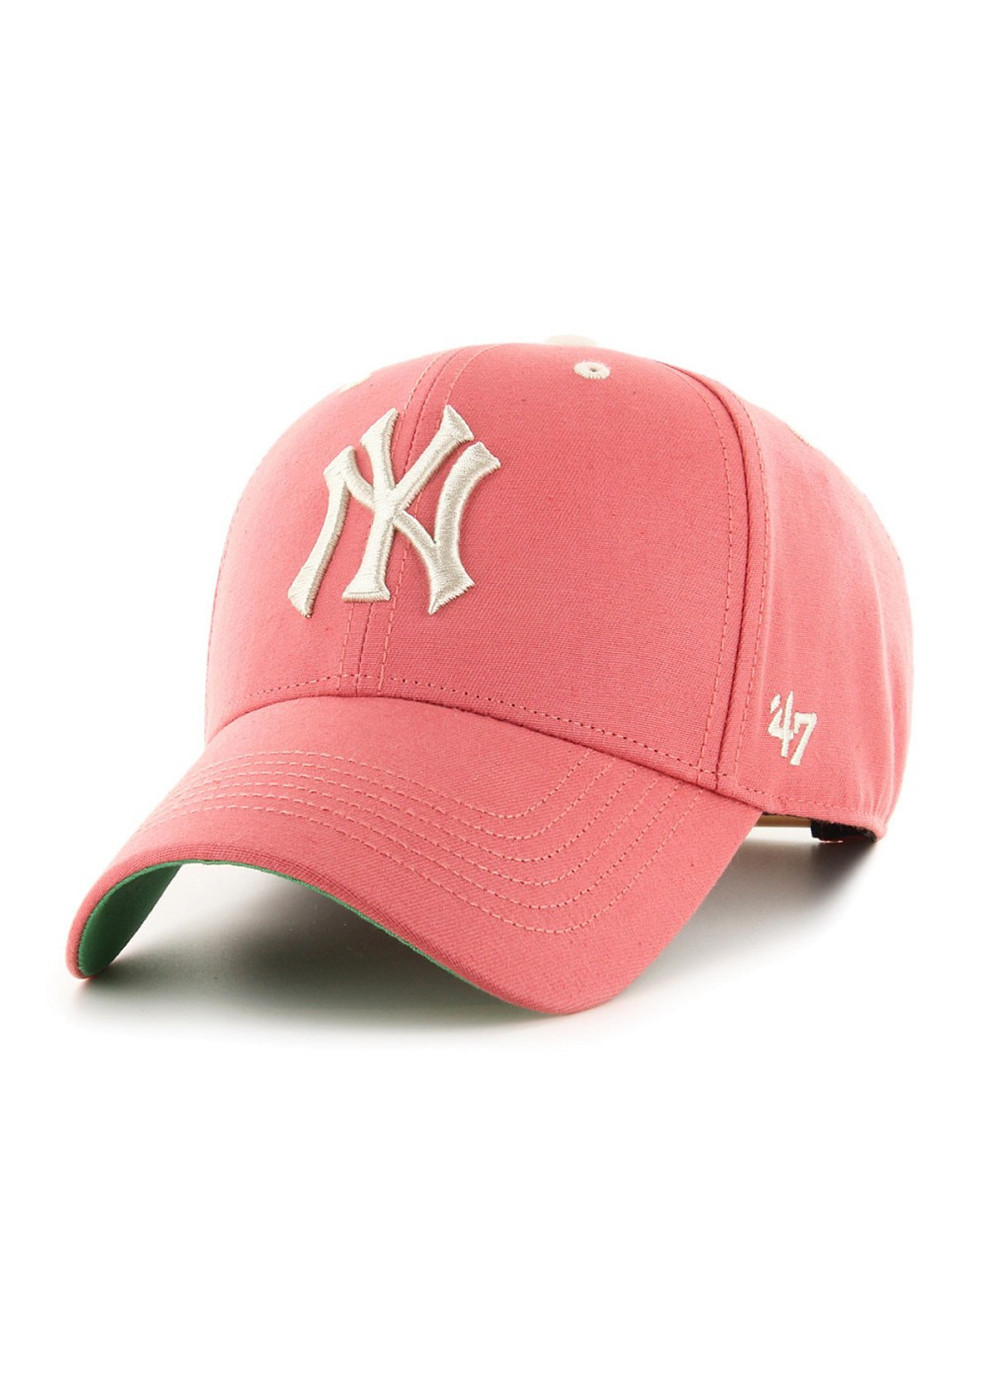 Кепка MVP NY YANKEES ROCKY One Size pink/green 47 Brand (258133956)